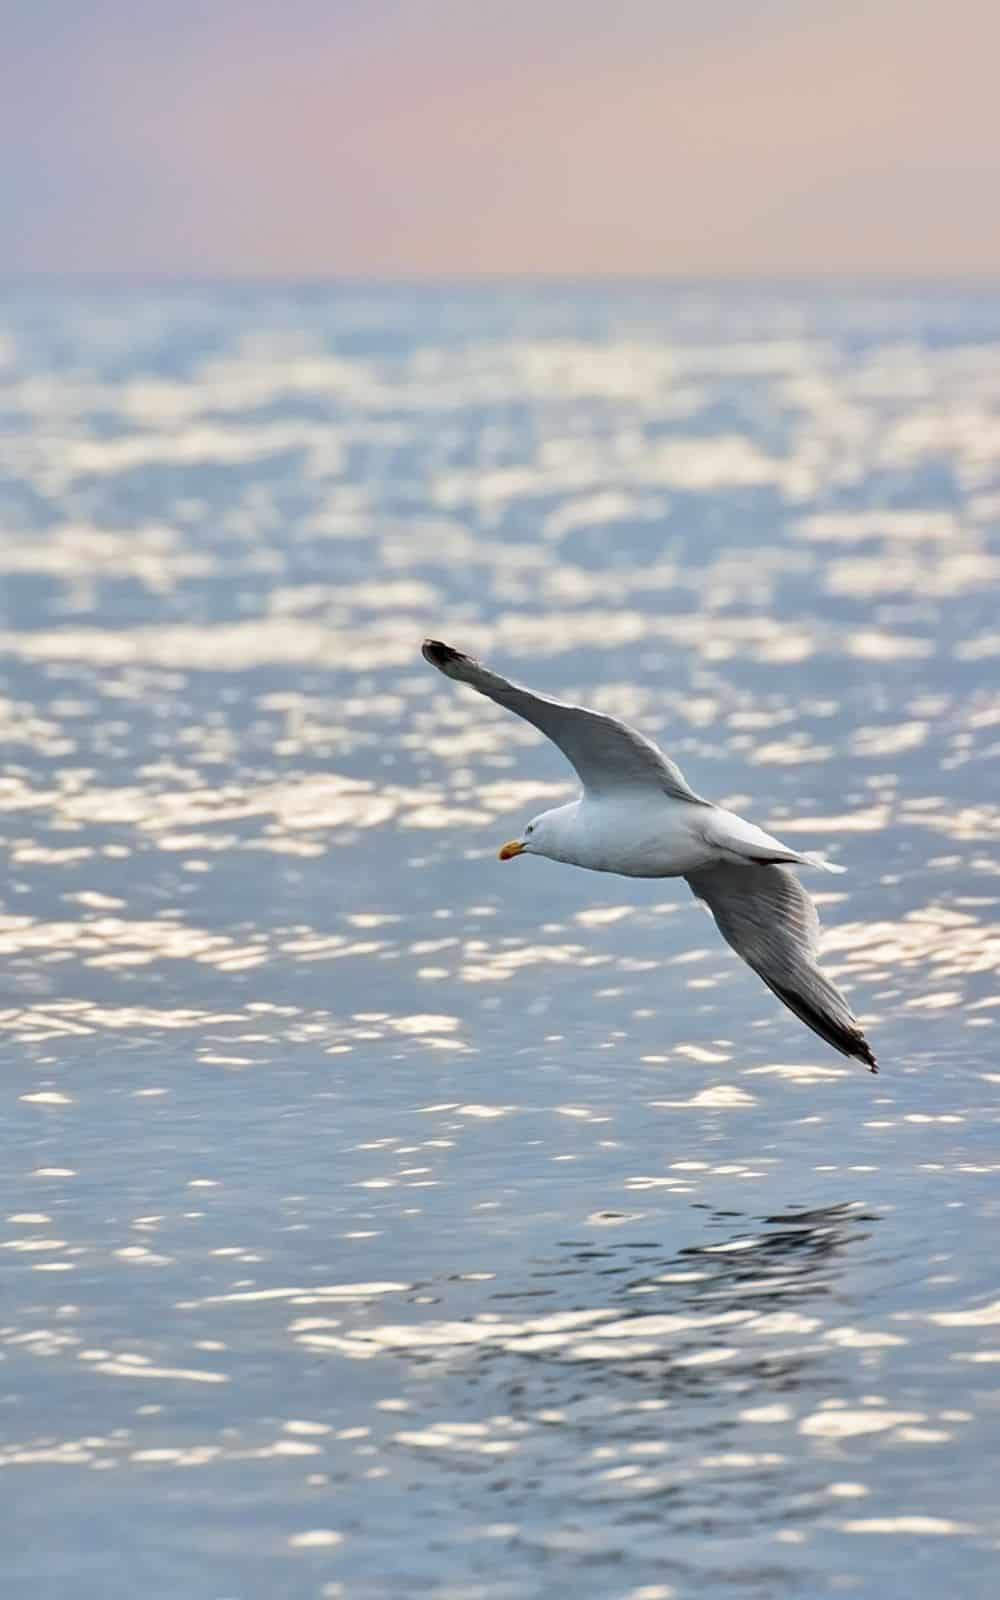 Seagull Spirit Animal - What are the characteristics of the seagull